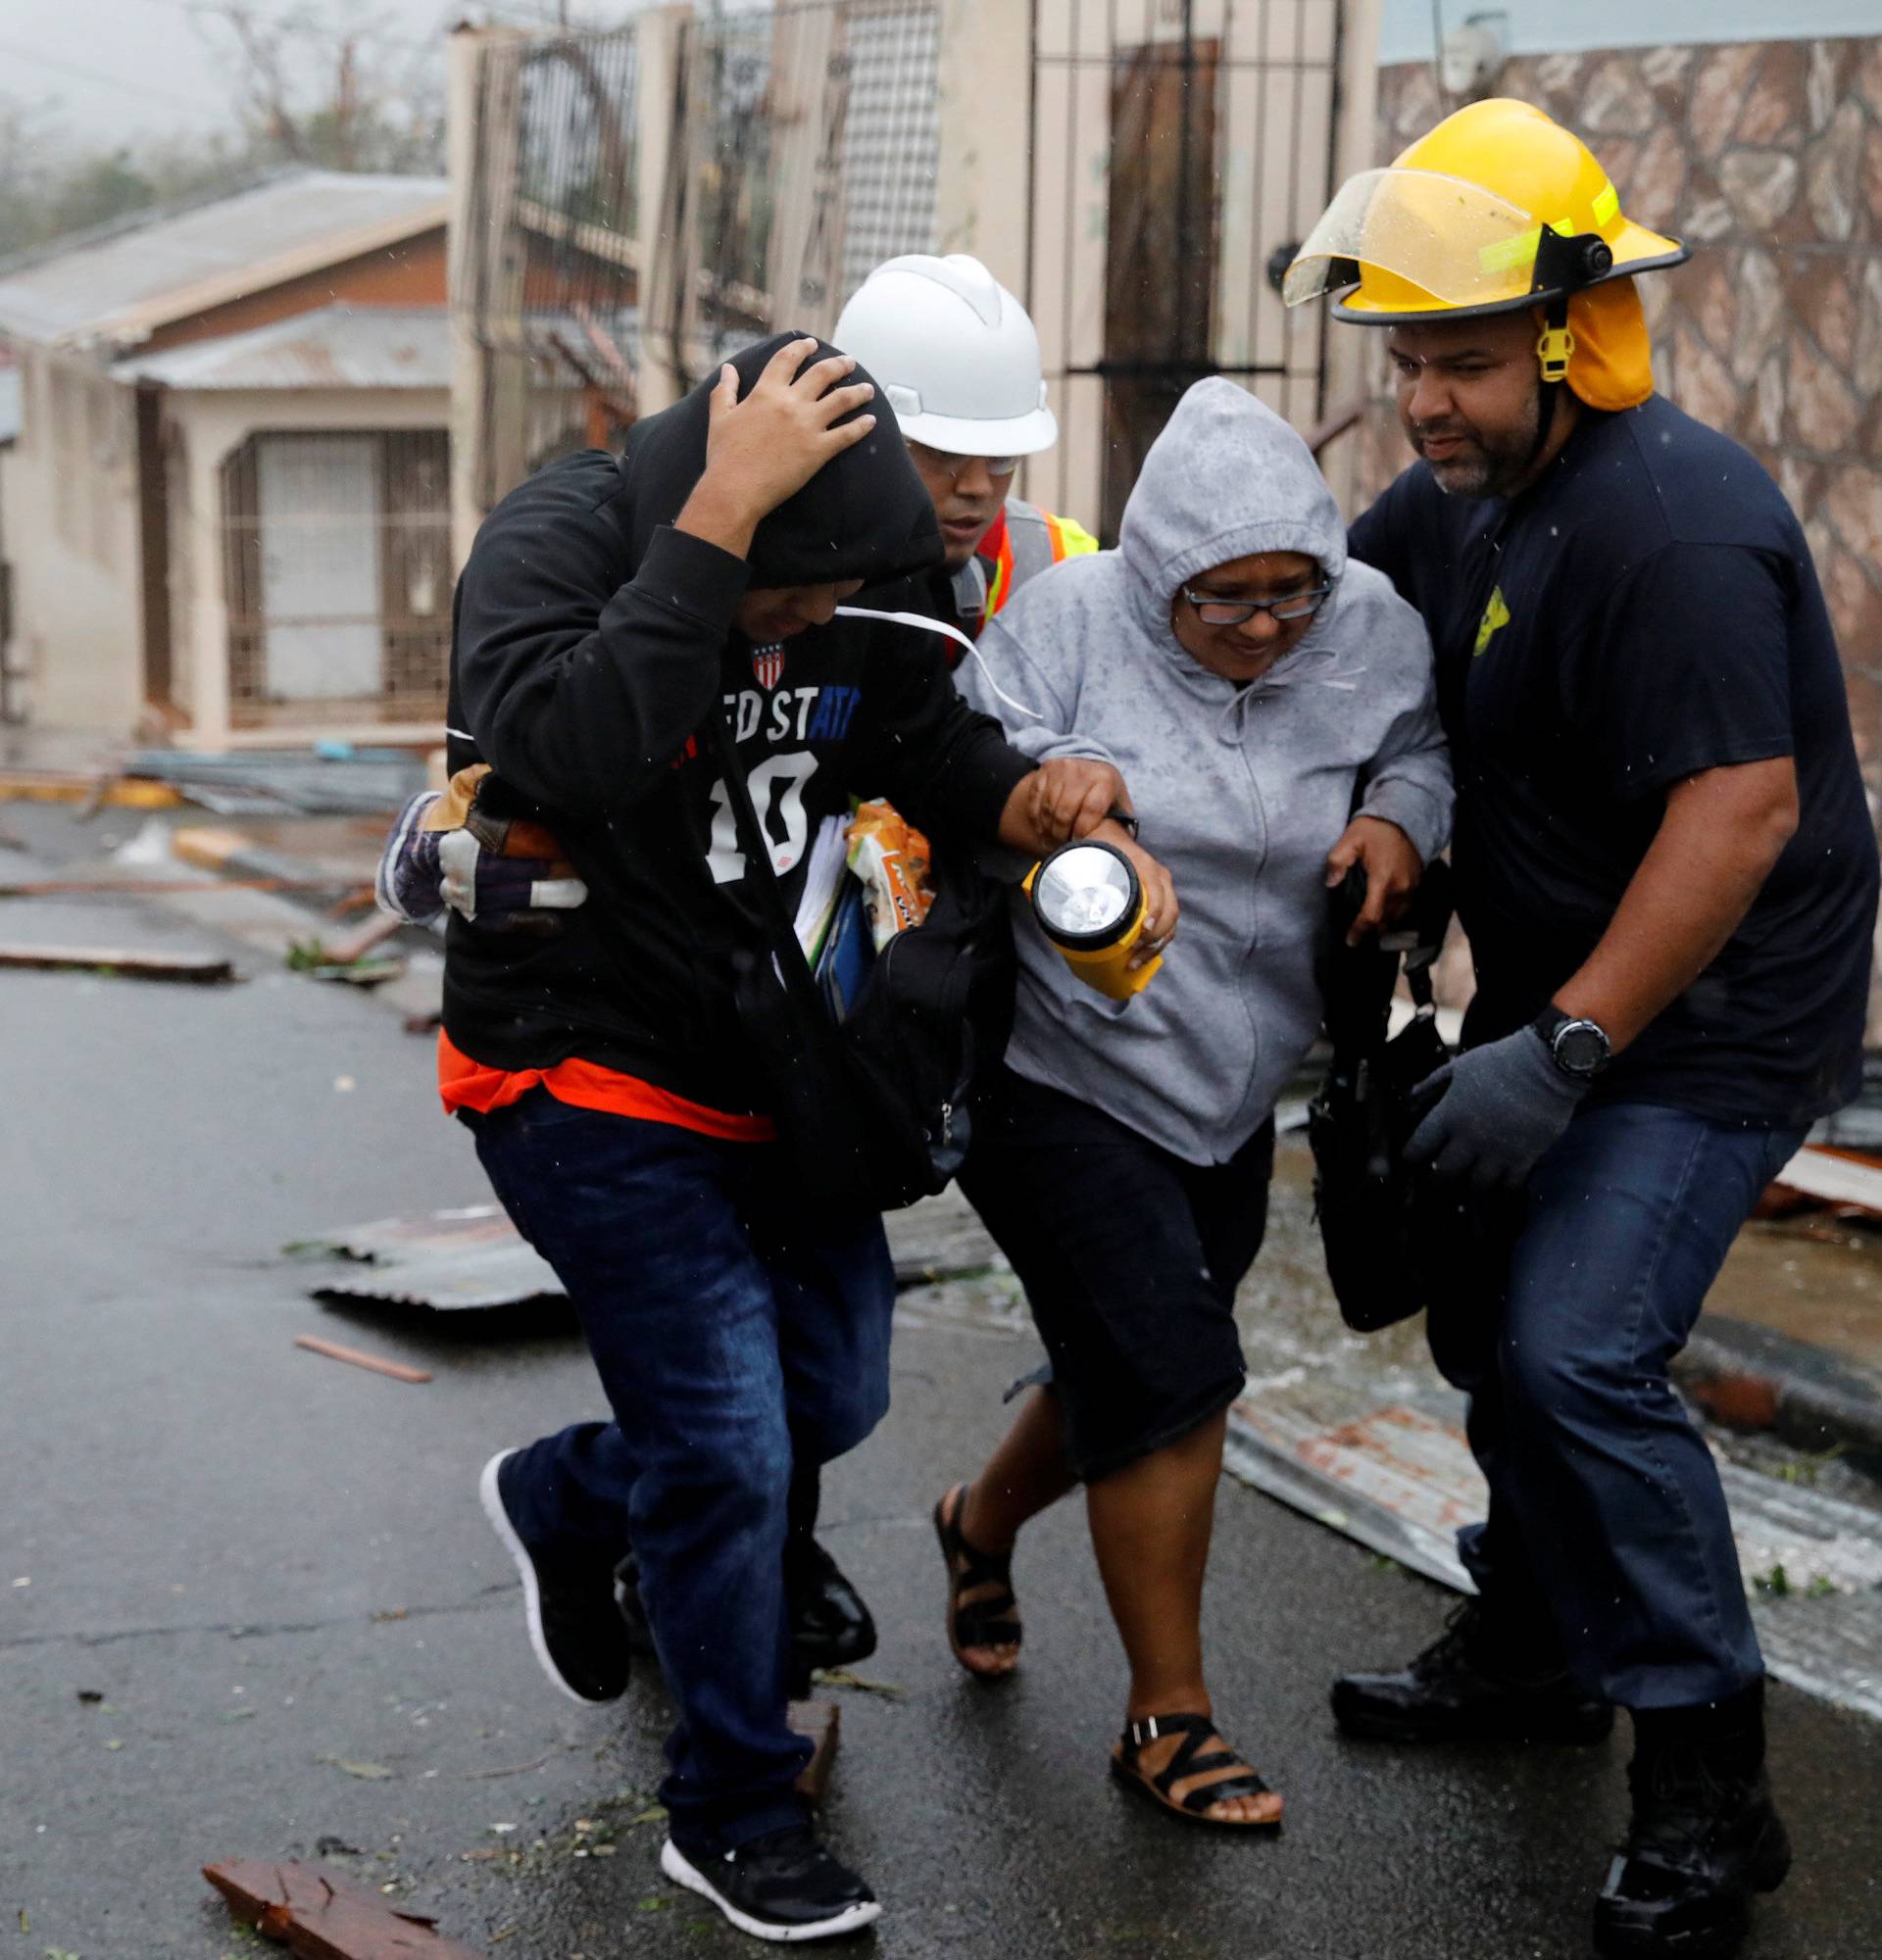 Rescue workers help people after the area was hit by Hurricane Maria in Guayama